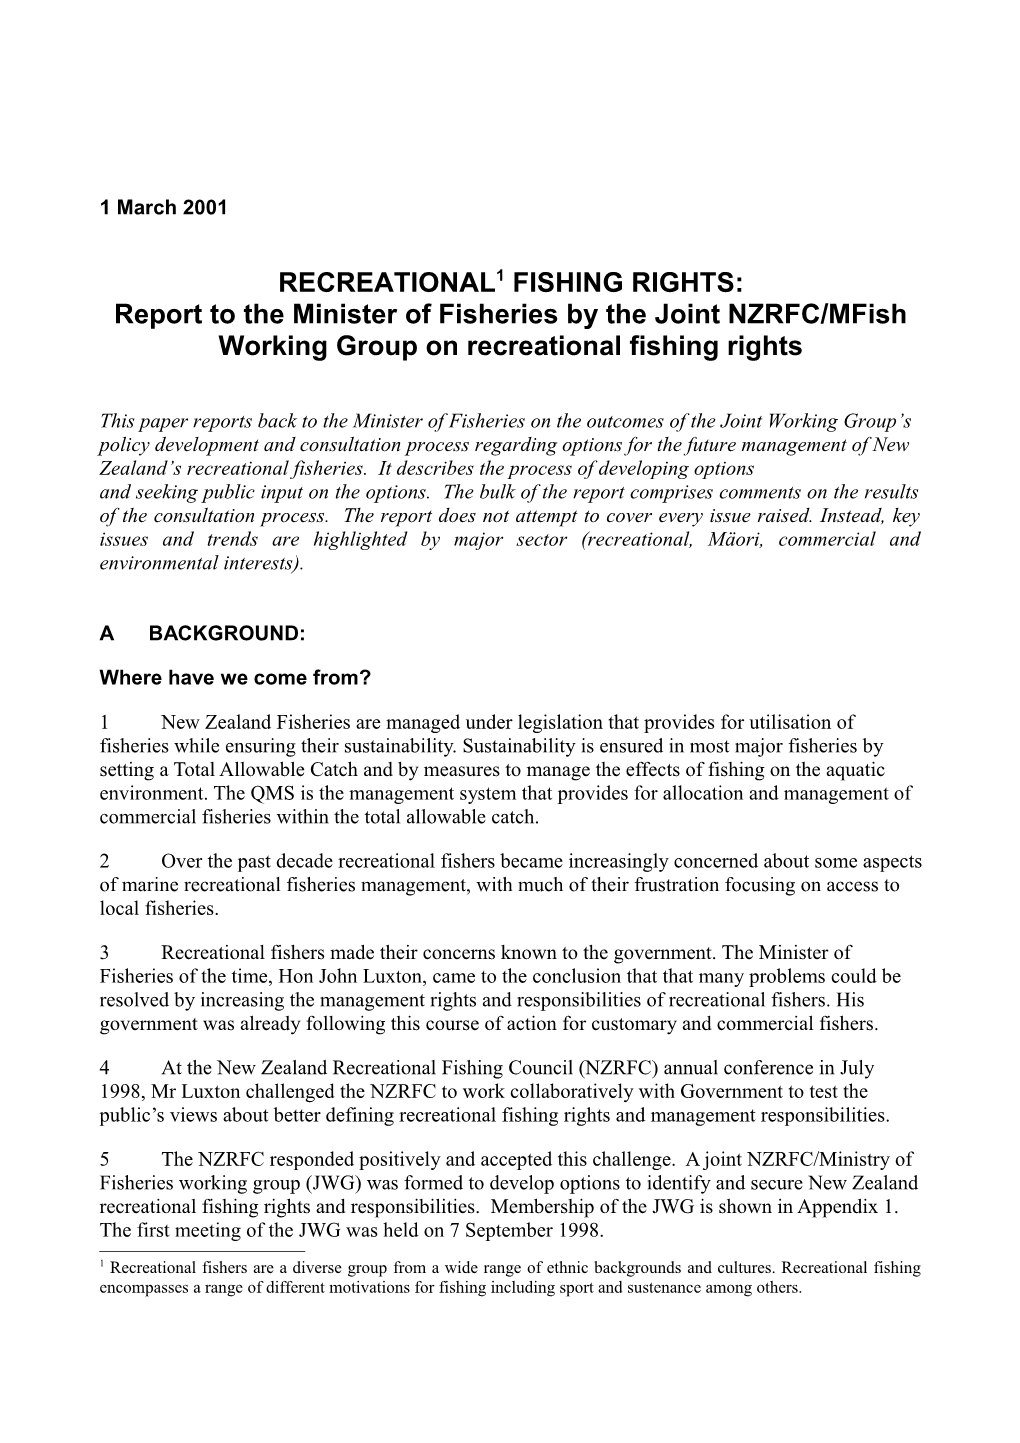 Report to the Minister of Fisheries by the Joint NZRFC/Mfish Working Group on Recreational